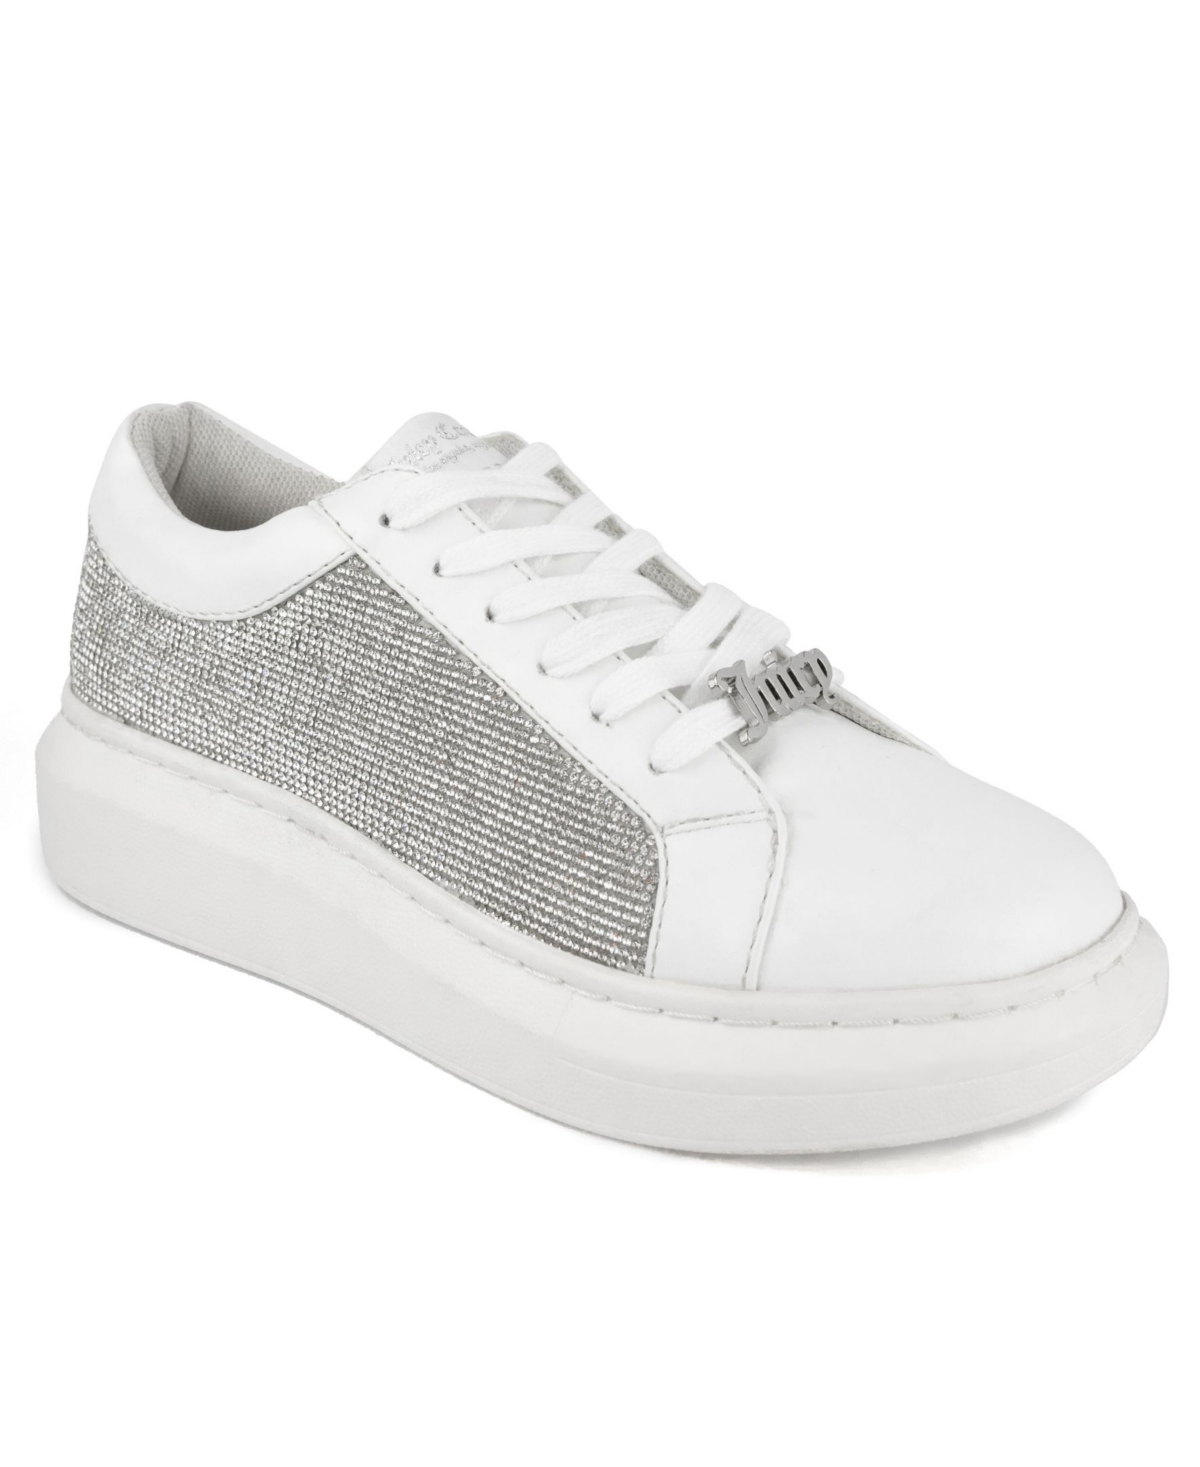 Juicy Couture Women's Dorothy Rhinestone Sneaker Women's Shoes In White ...